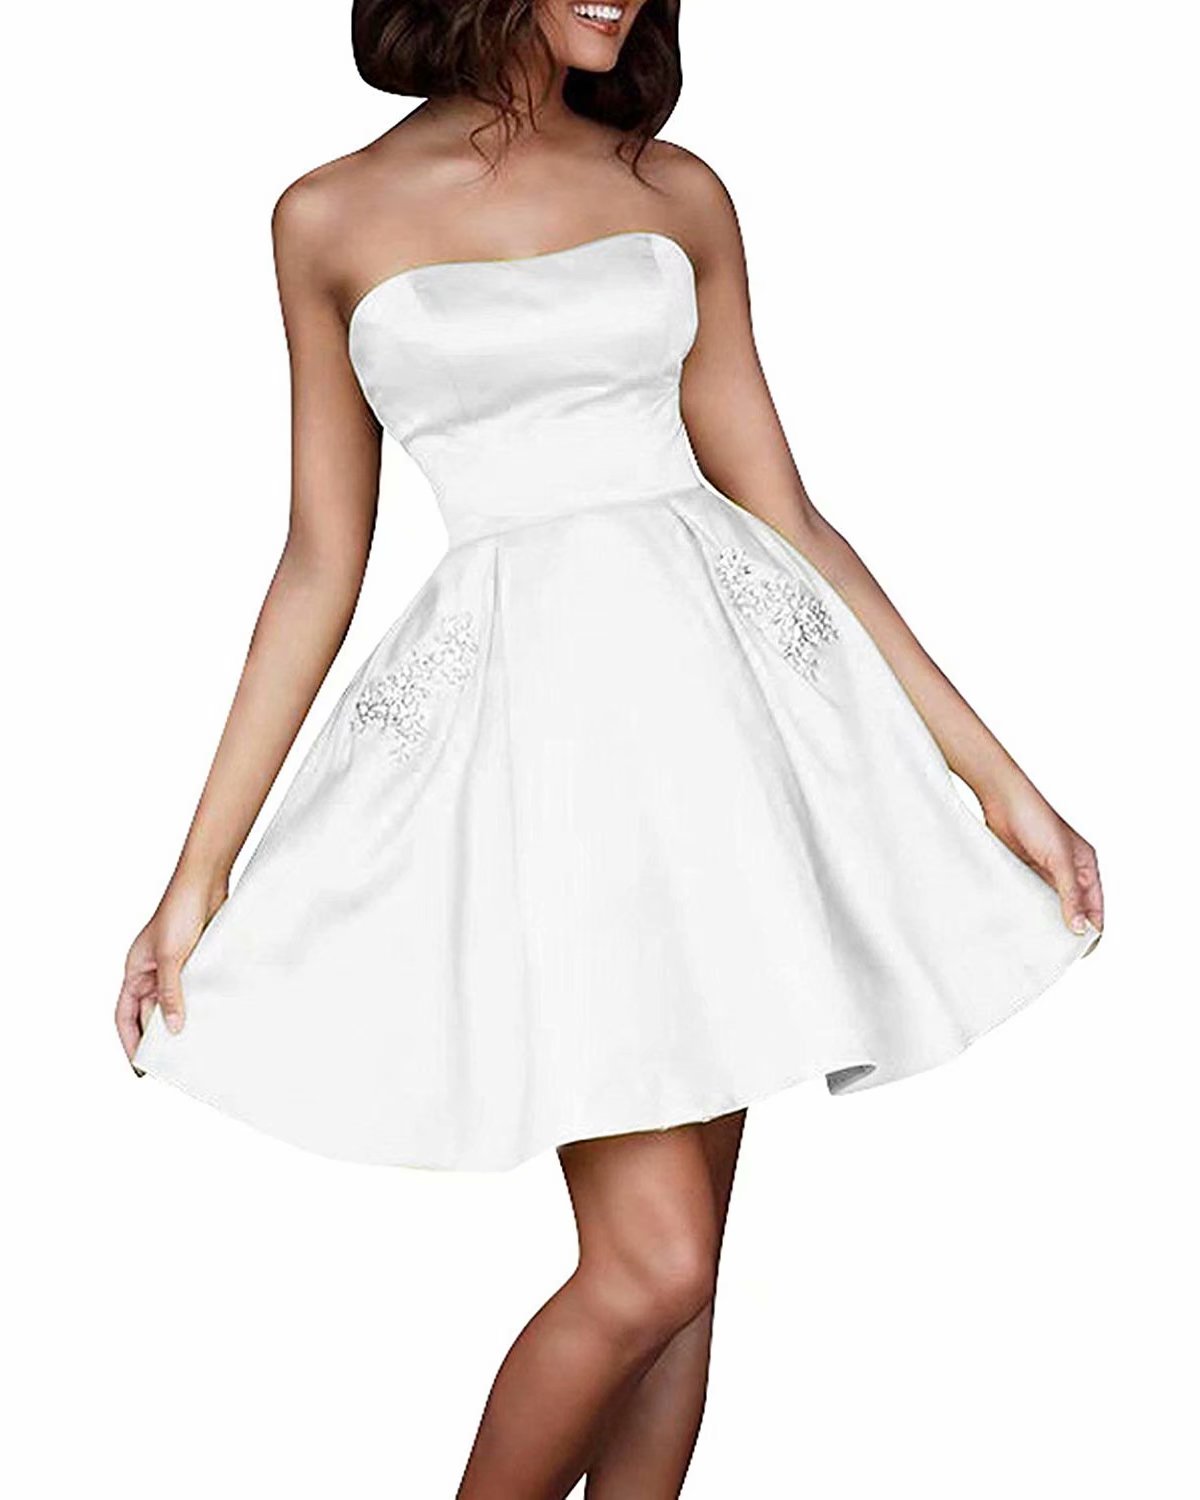 2019 White Short Homecoming Dresses Prom Party Evening Cocktail Gown Bridesmaid Formal Dresses